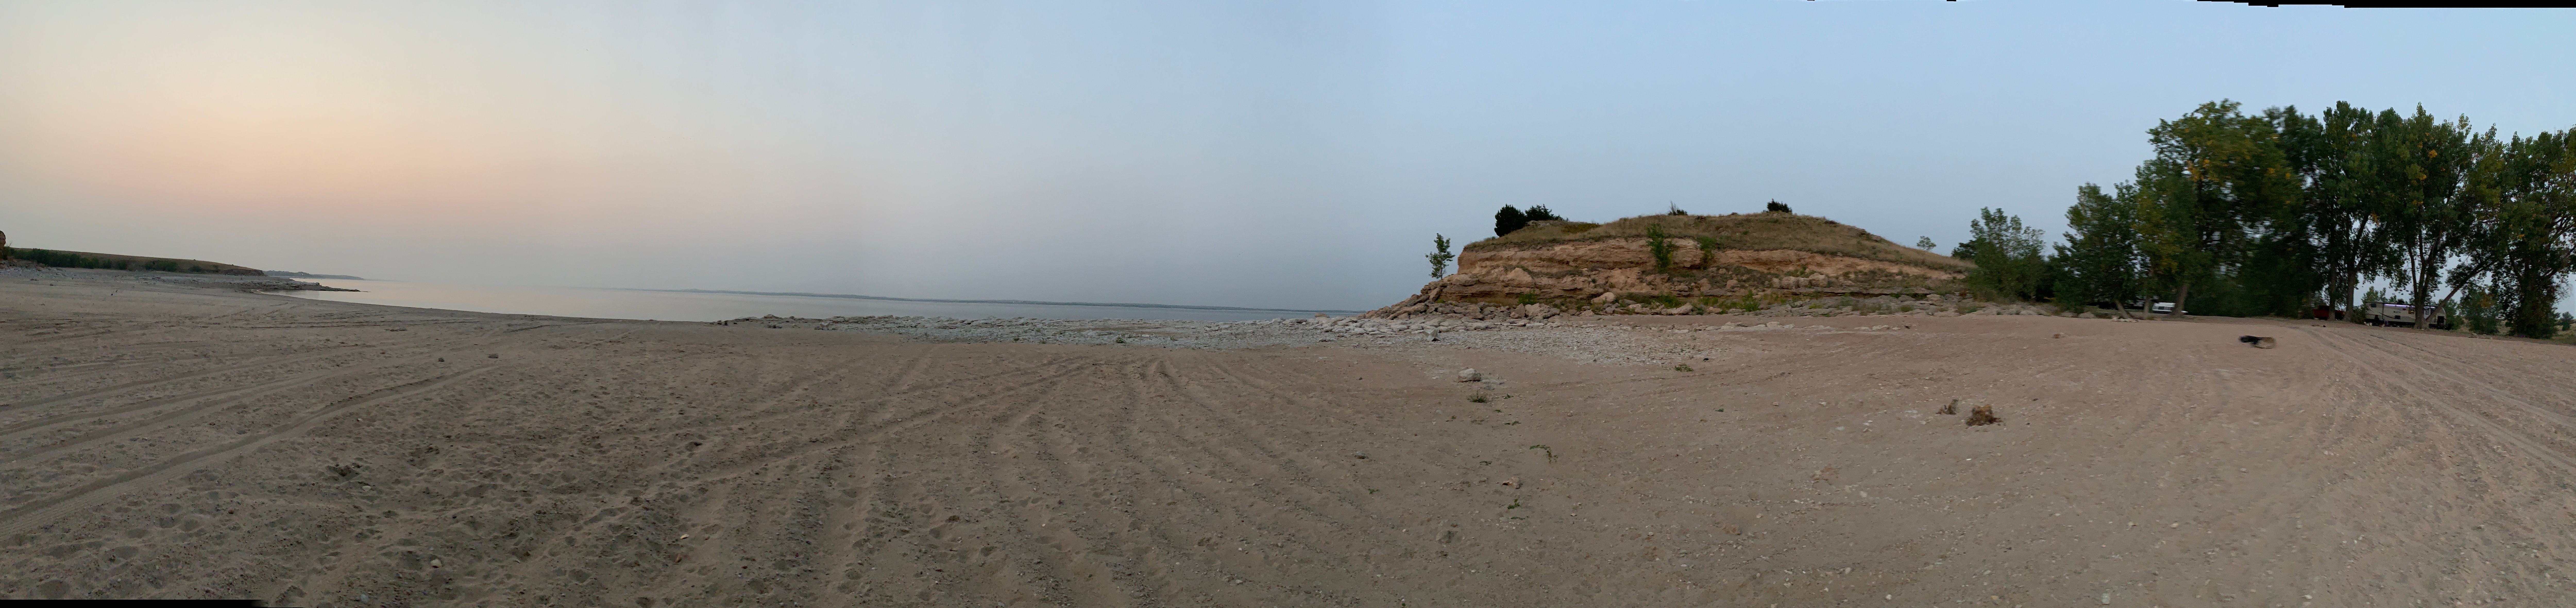 Camper submitted image from Ogallala Beach - 2